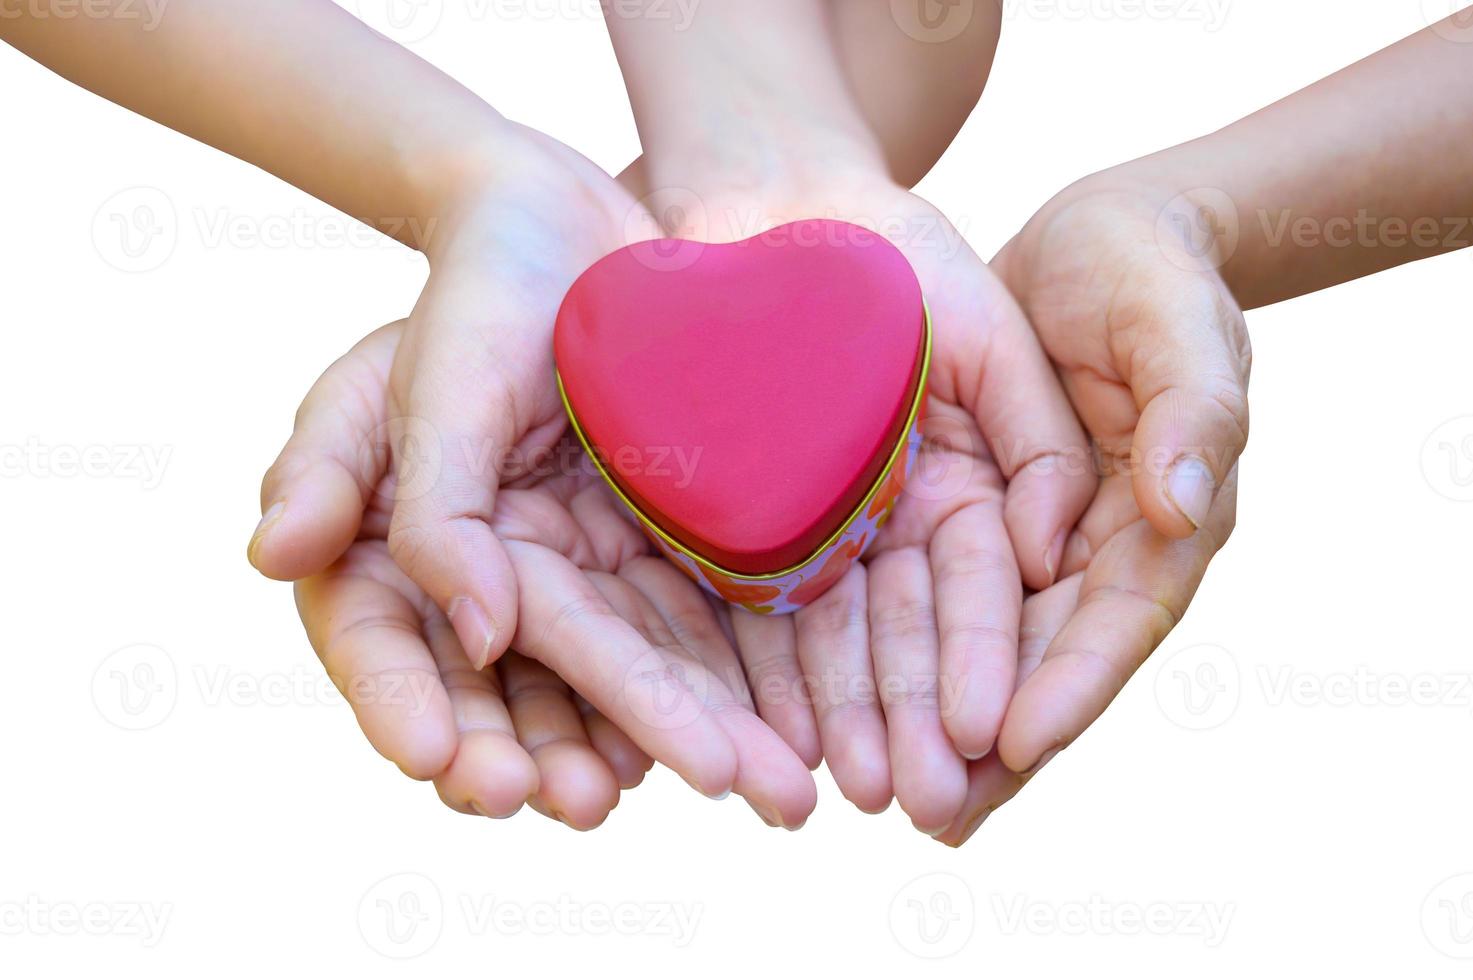 The hands of children and adults in the family have a heart in their hands. Isolate photo